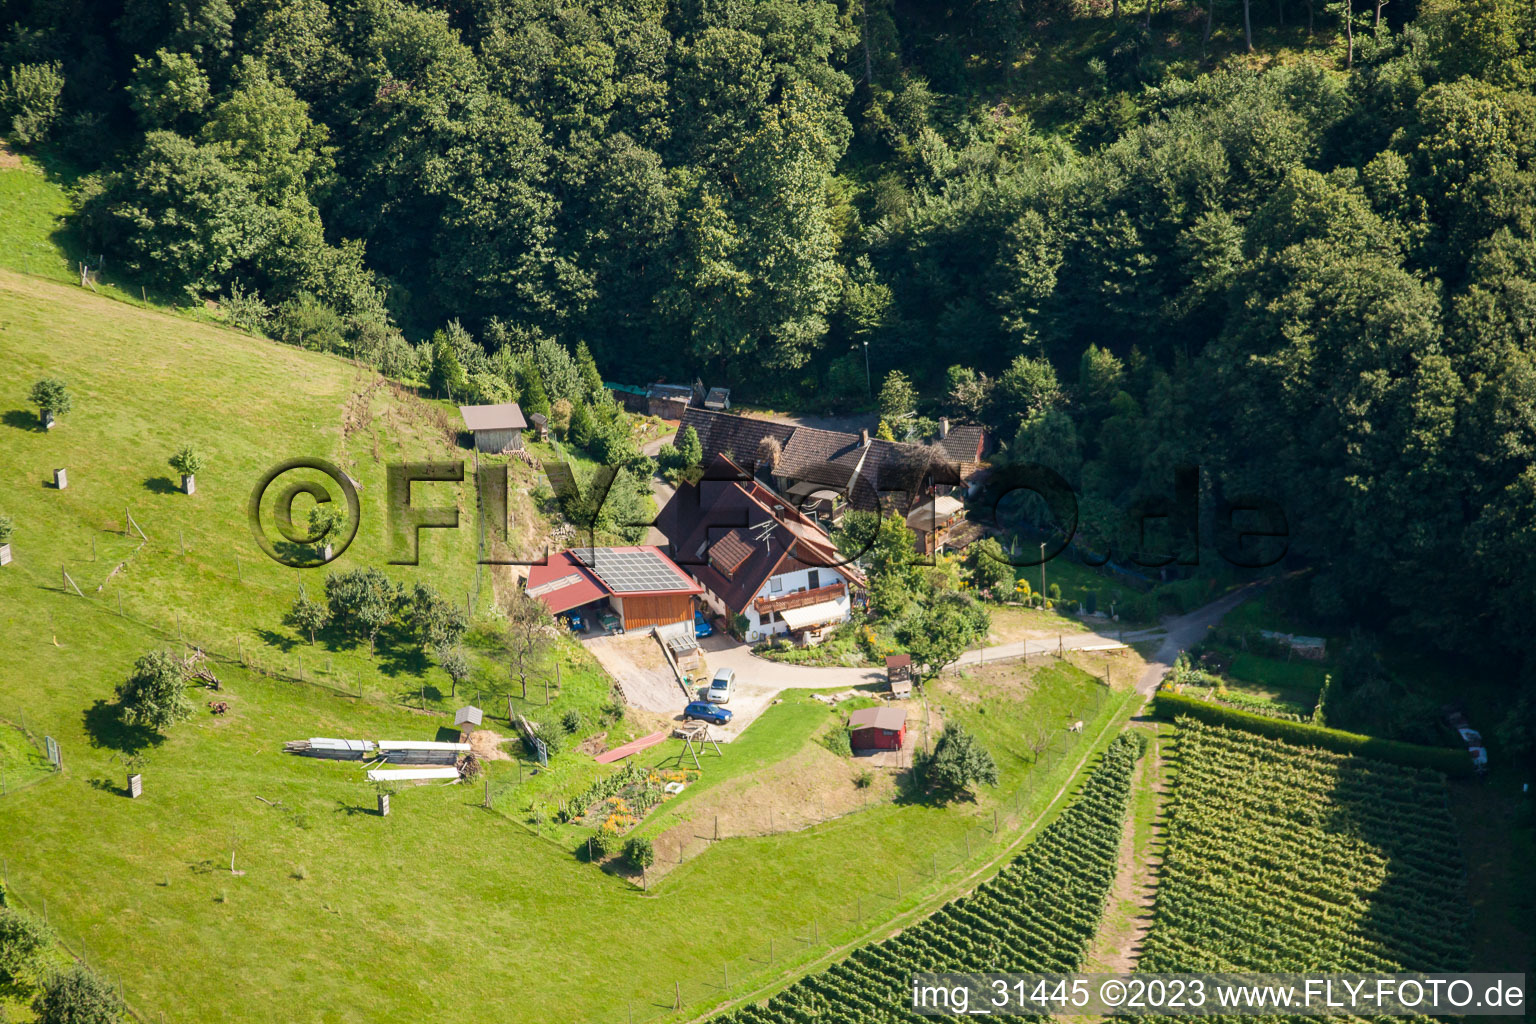 Kappelwindeck in the district Riegel in Bühl in the state Baden-Wuerttemberg, Germany from above